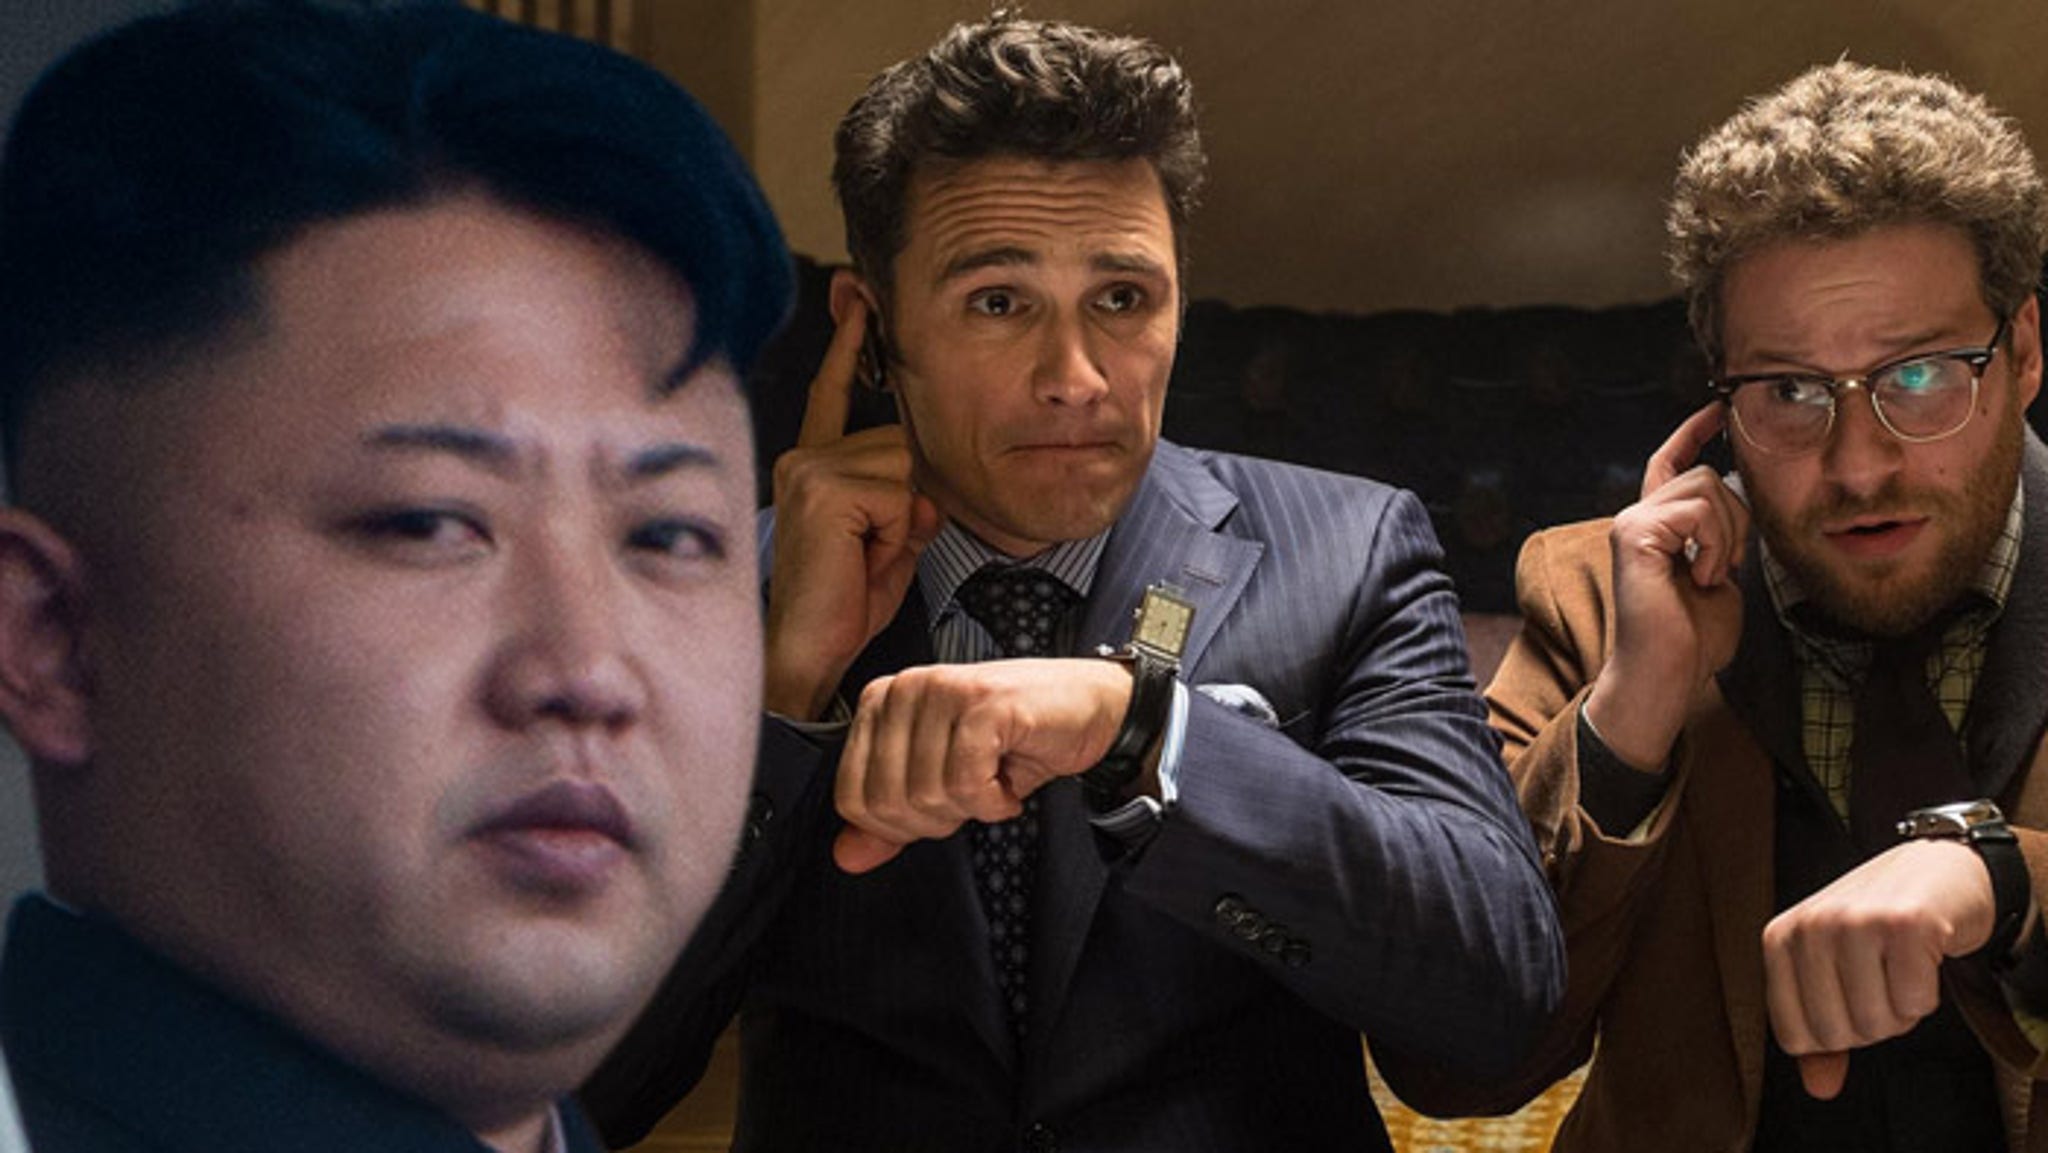 North Korea Seth Rogen And James Franco Movie Is Act Of War